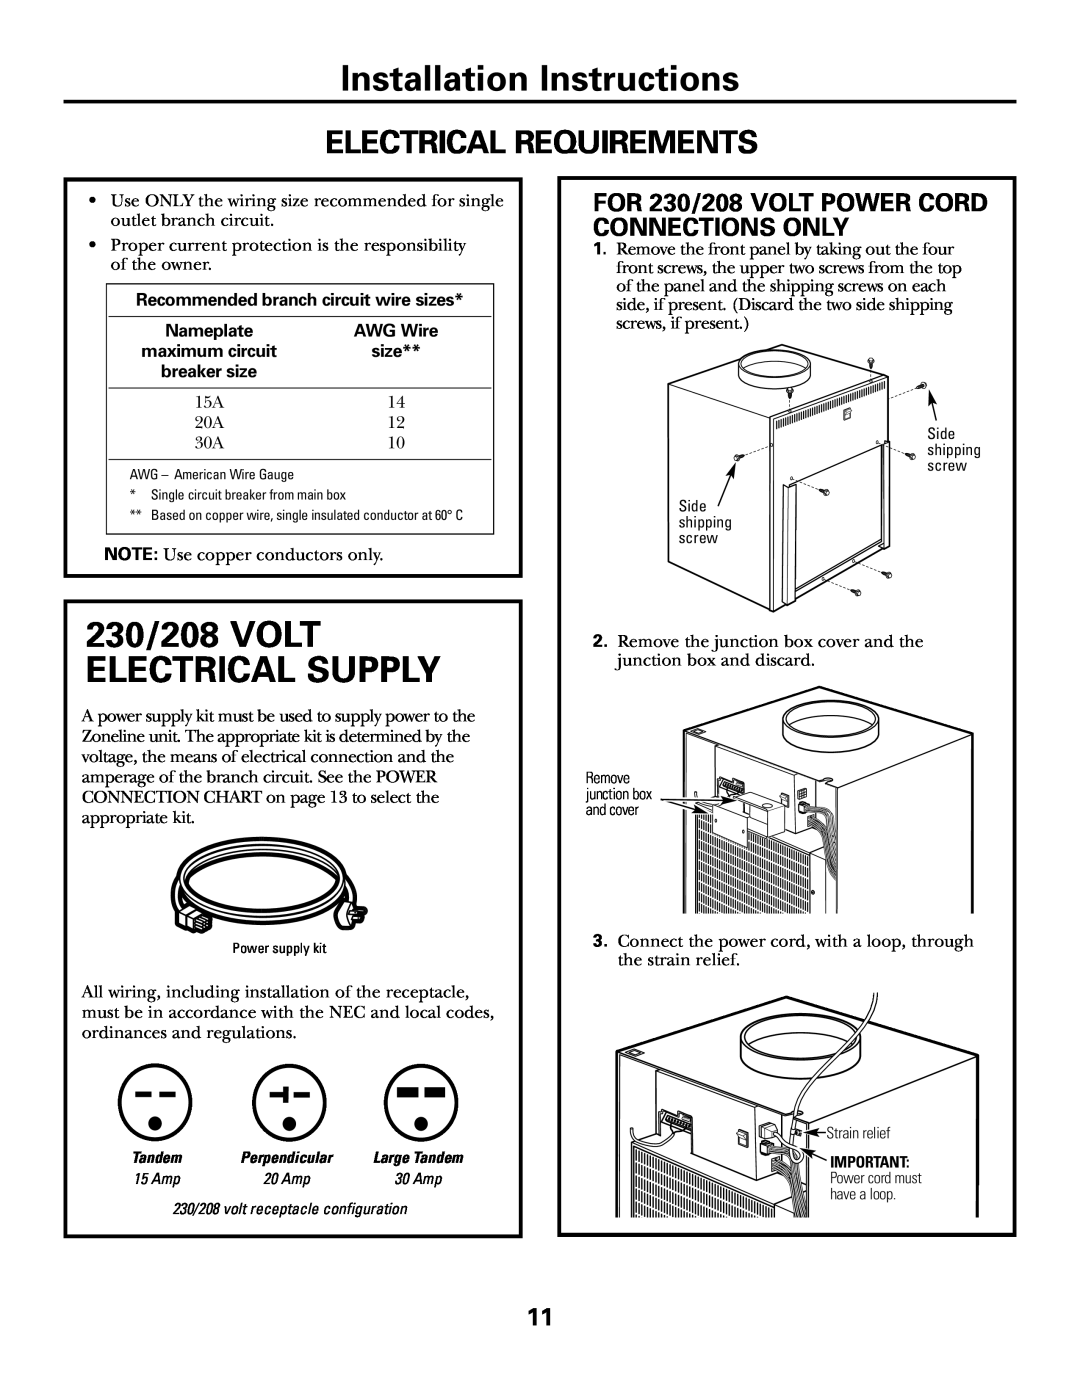 GE 49-7419-2 Installation Instructions, Electrical Requirements, FOR 230/208 VOLT POWER CORD CONNECTIONS ONLY, size 